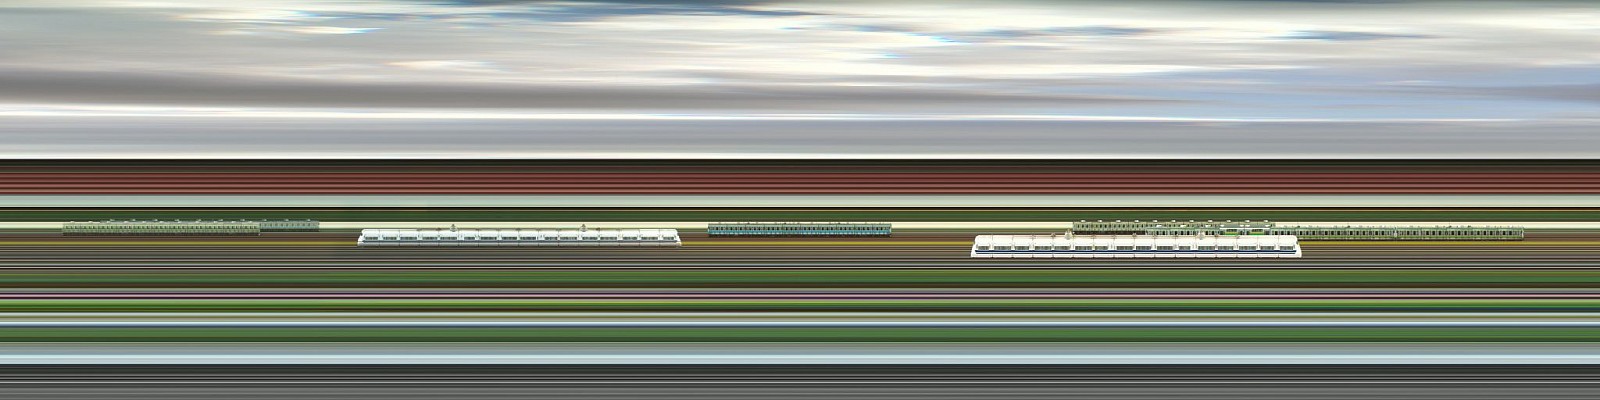 Jay Mark Johnson, TOKYO TRAINS #2, 2012 Tokyo
archival pigment on paper, mounted on aluminum, 40 x 160 in. (101.6 x 406.4 cm)